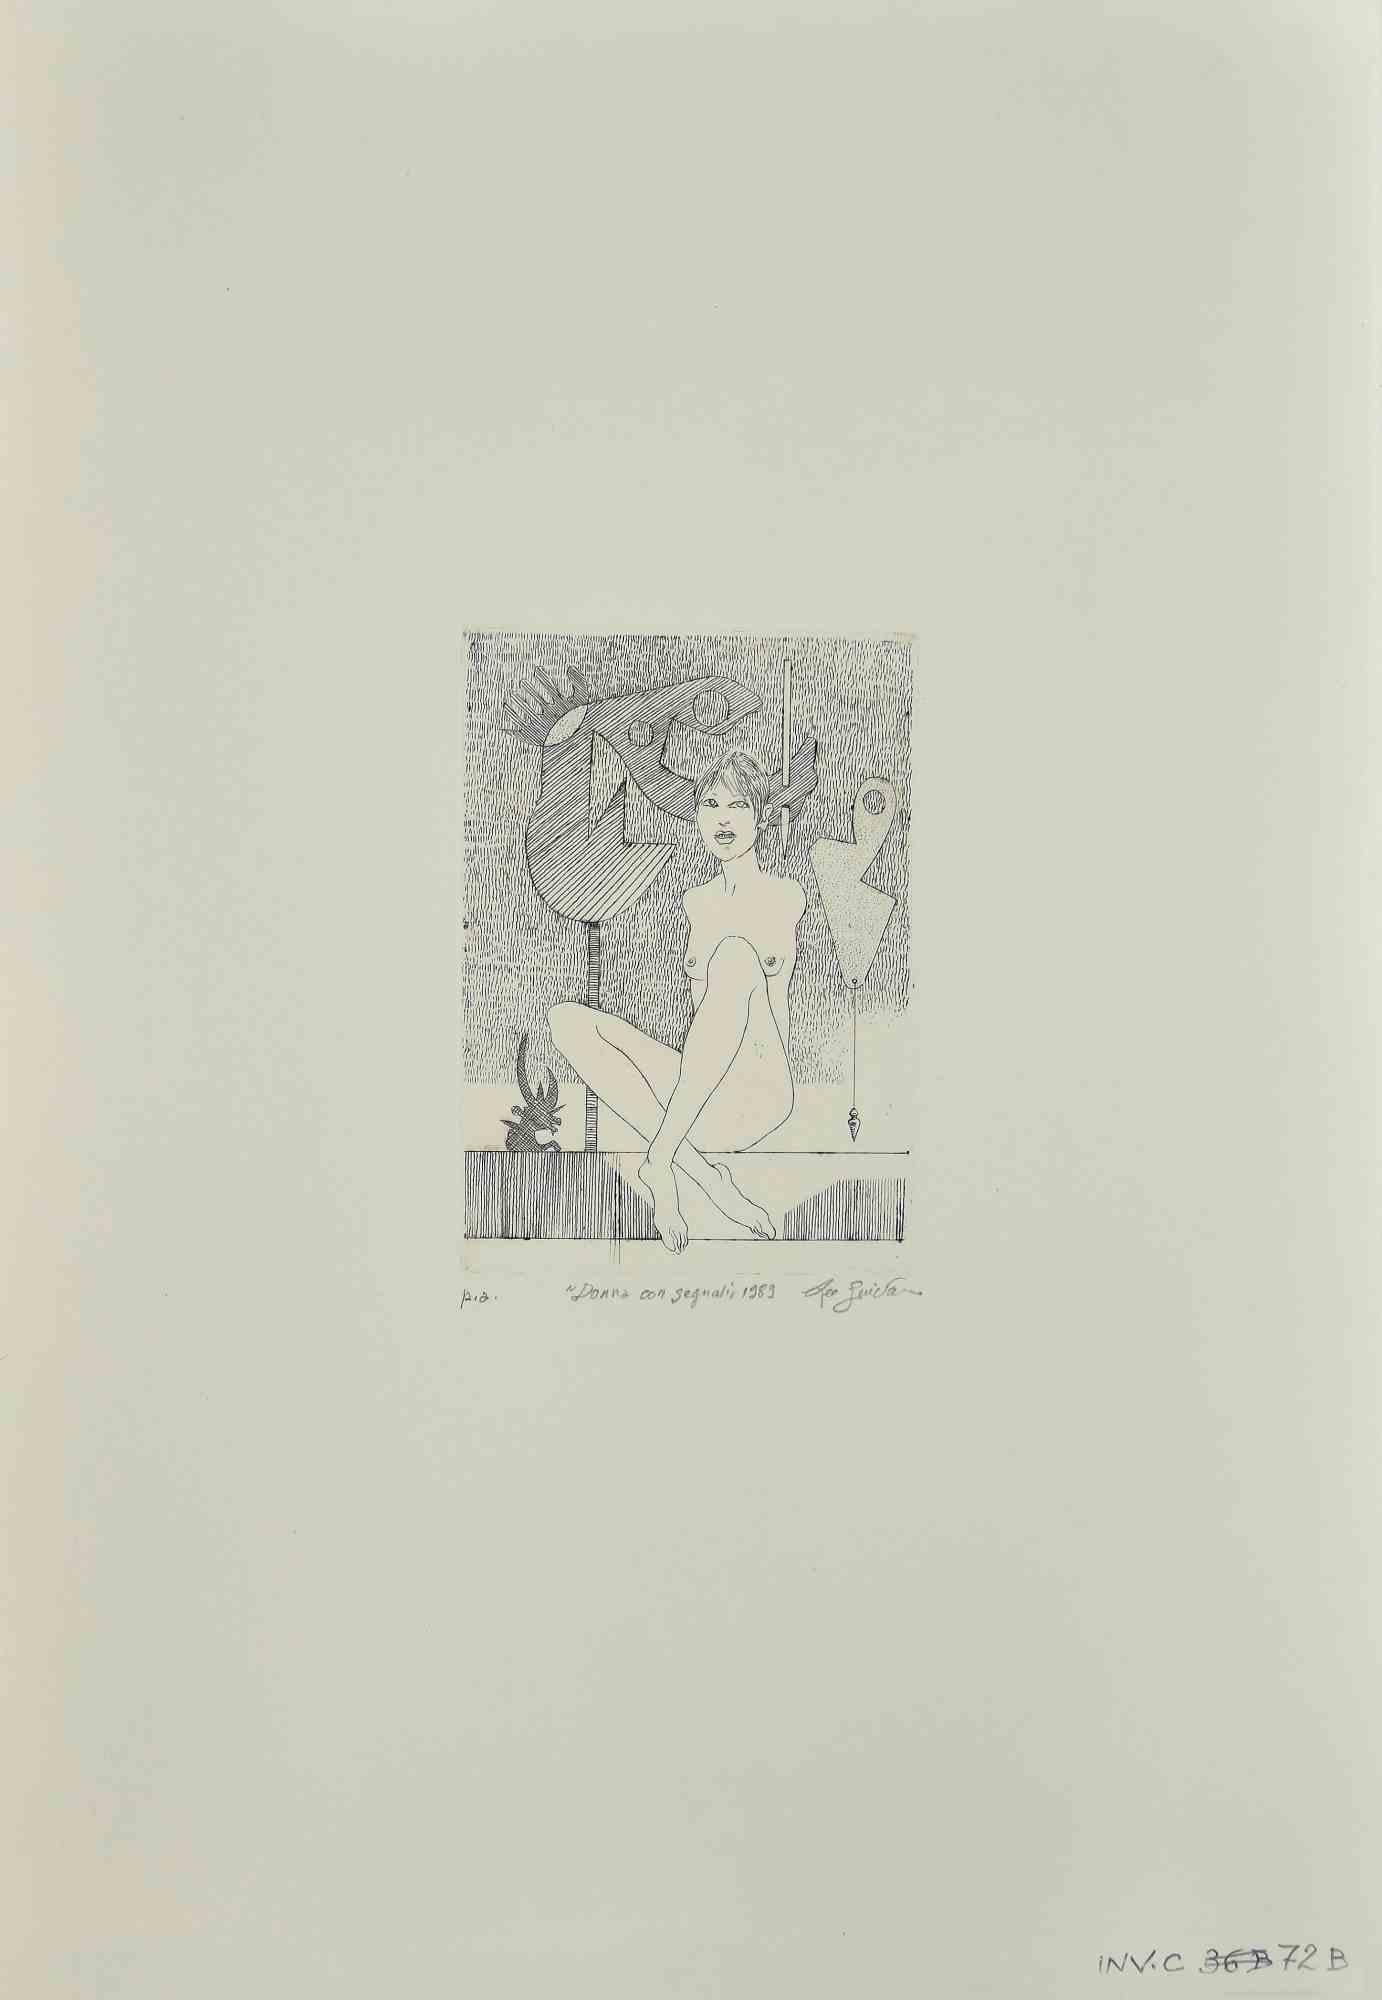 Woman with Signals - Original Etching by Leo Guida - 1989